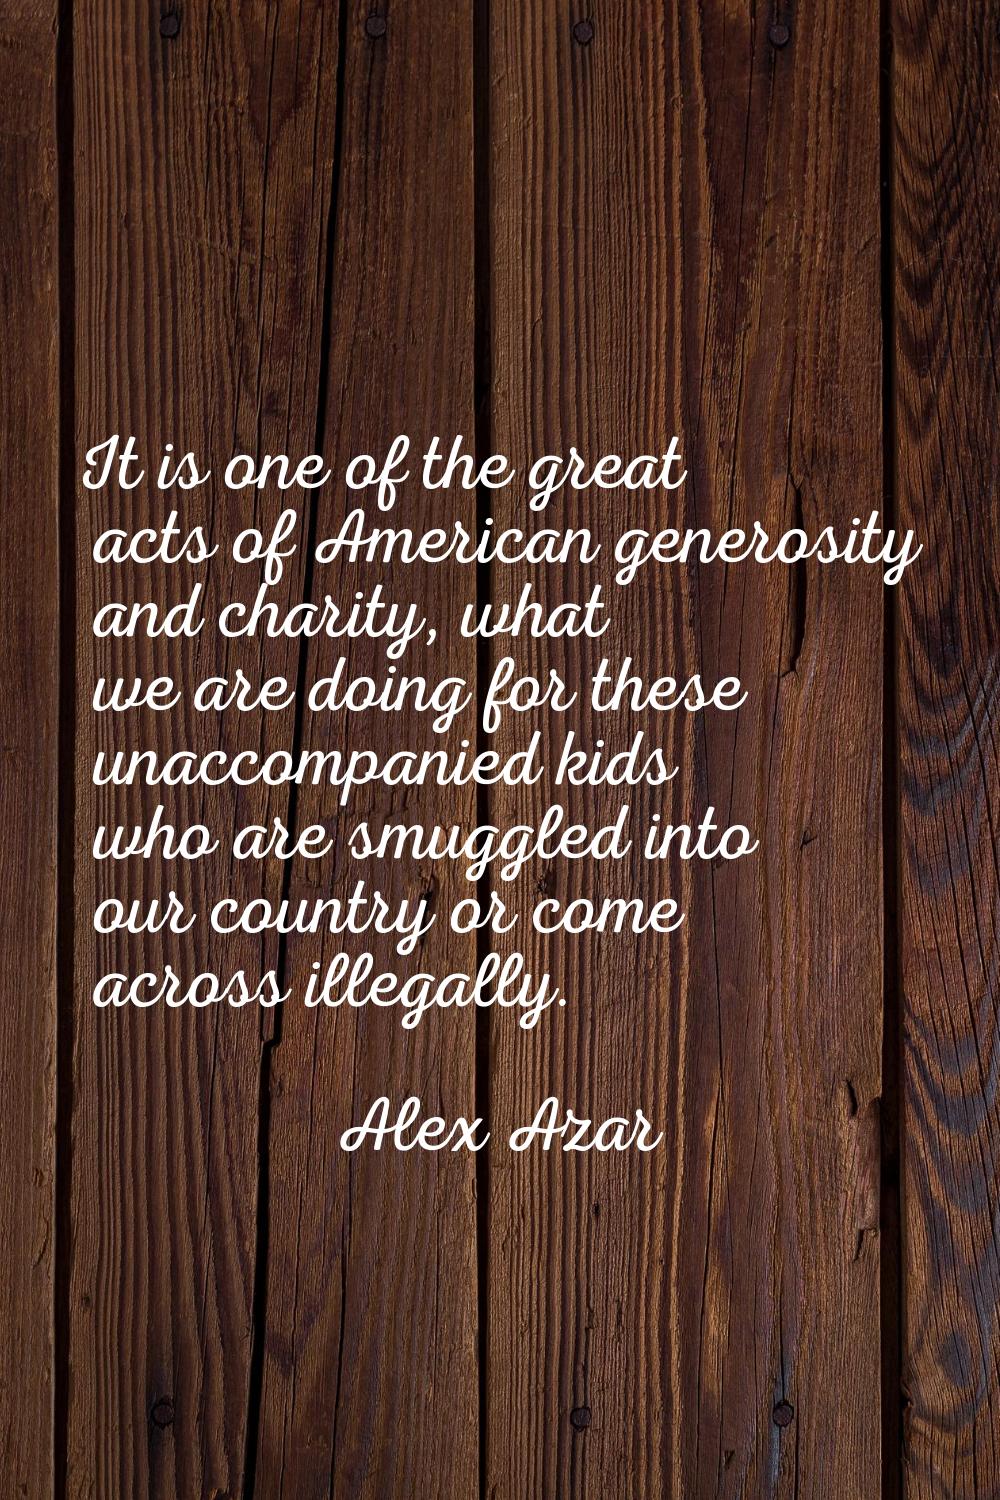 It is one of the great acts of American generosity and charity, what we are doing for these unaccom